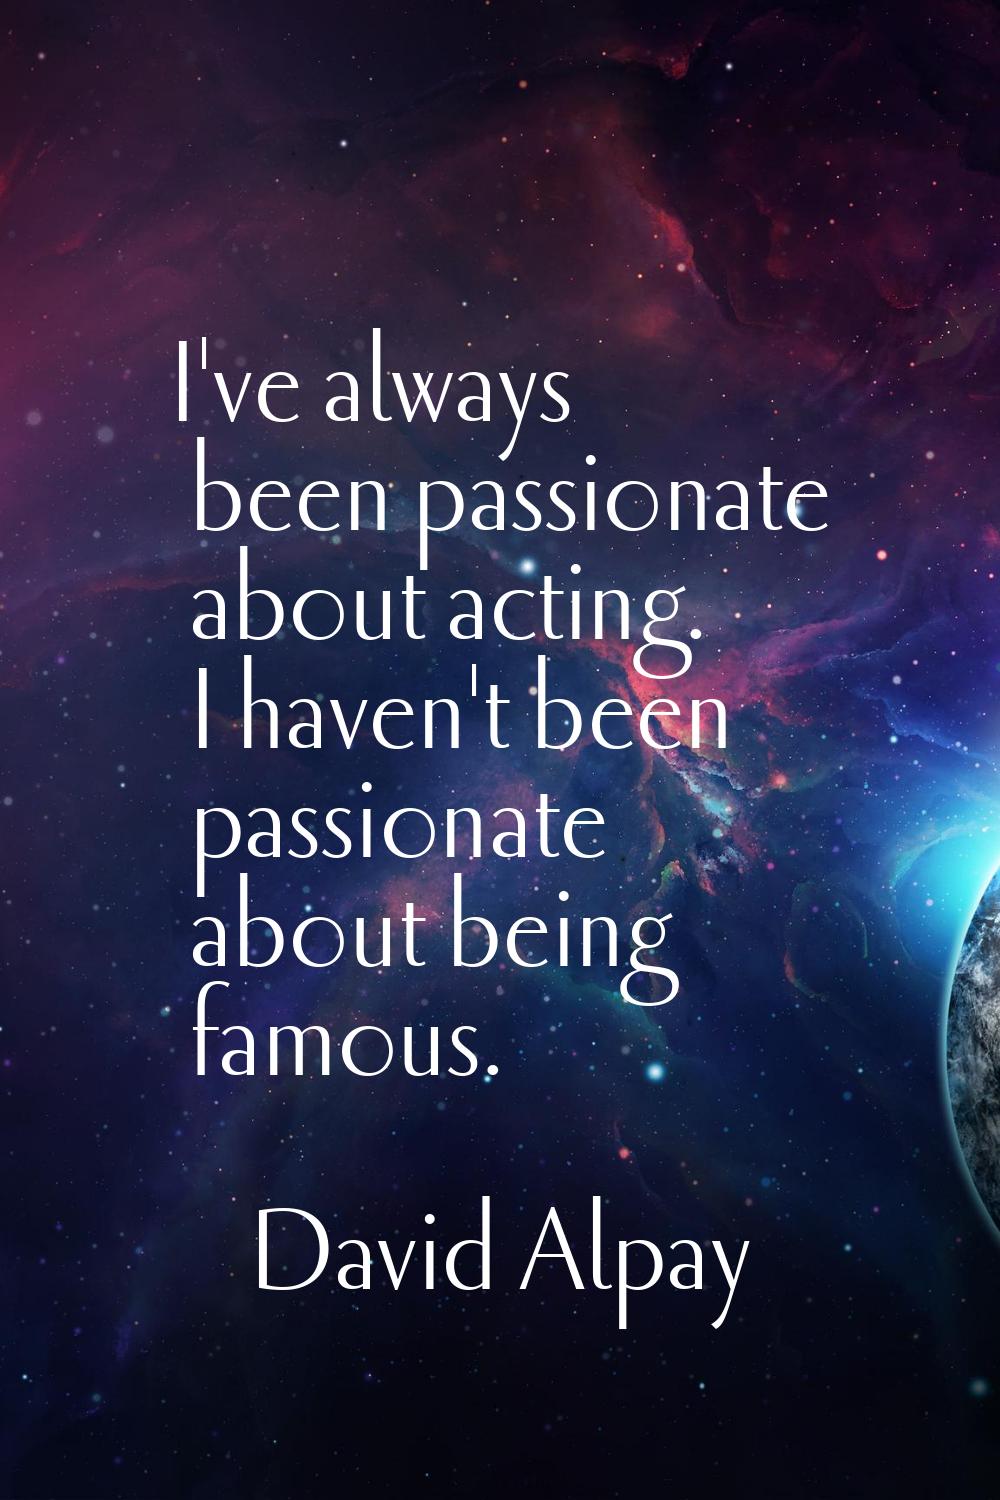 I've always been passionate about acting. I haven't been passionate about being famous.